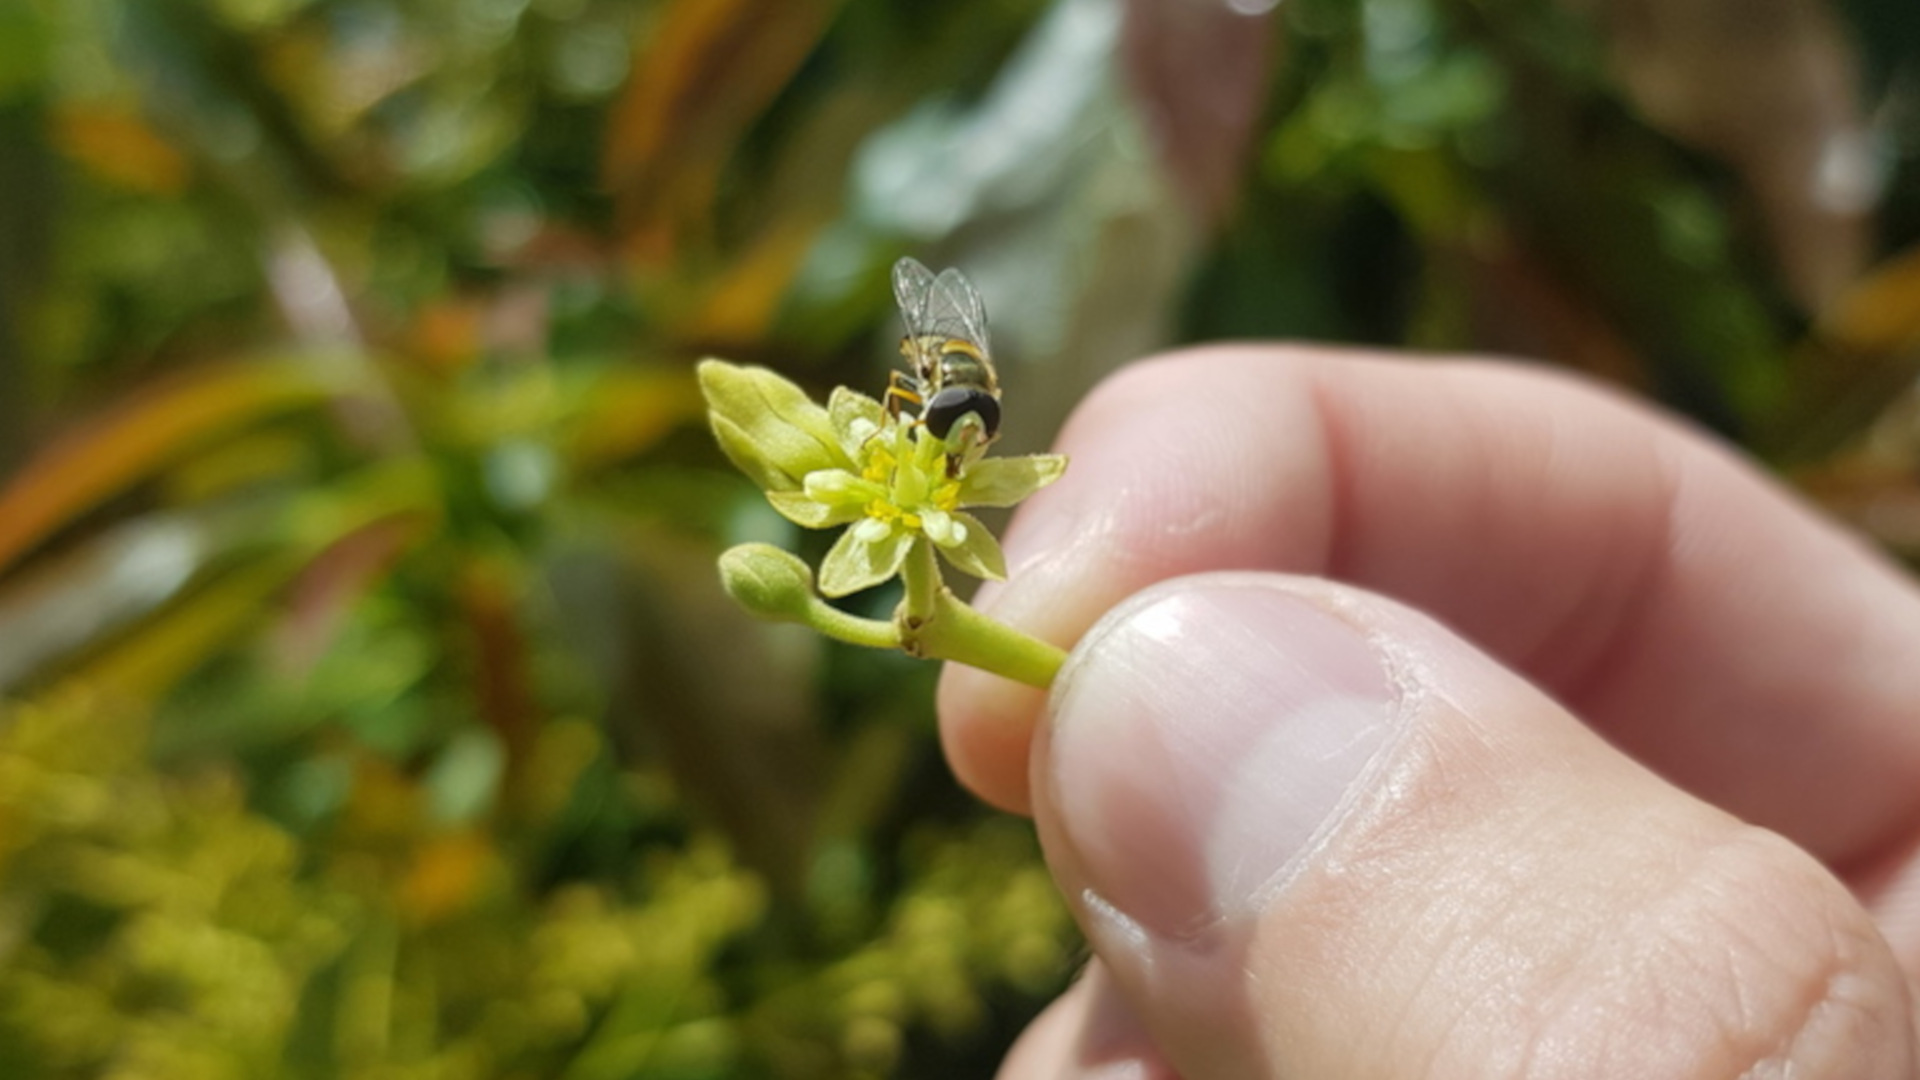 A hoverfly sits on an avocado flower in southwest Australia.